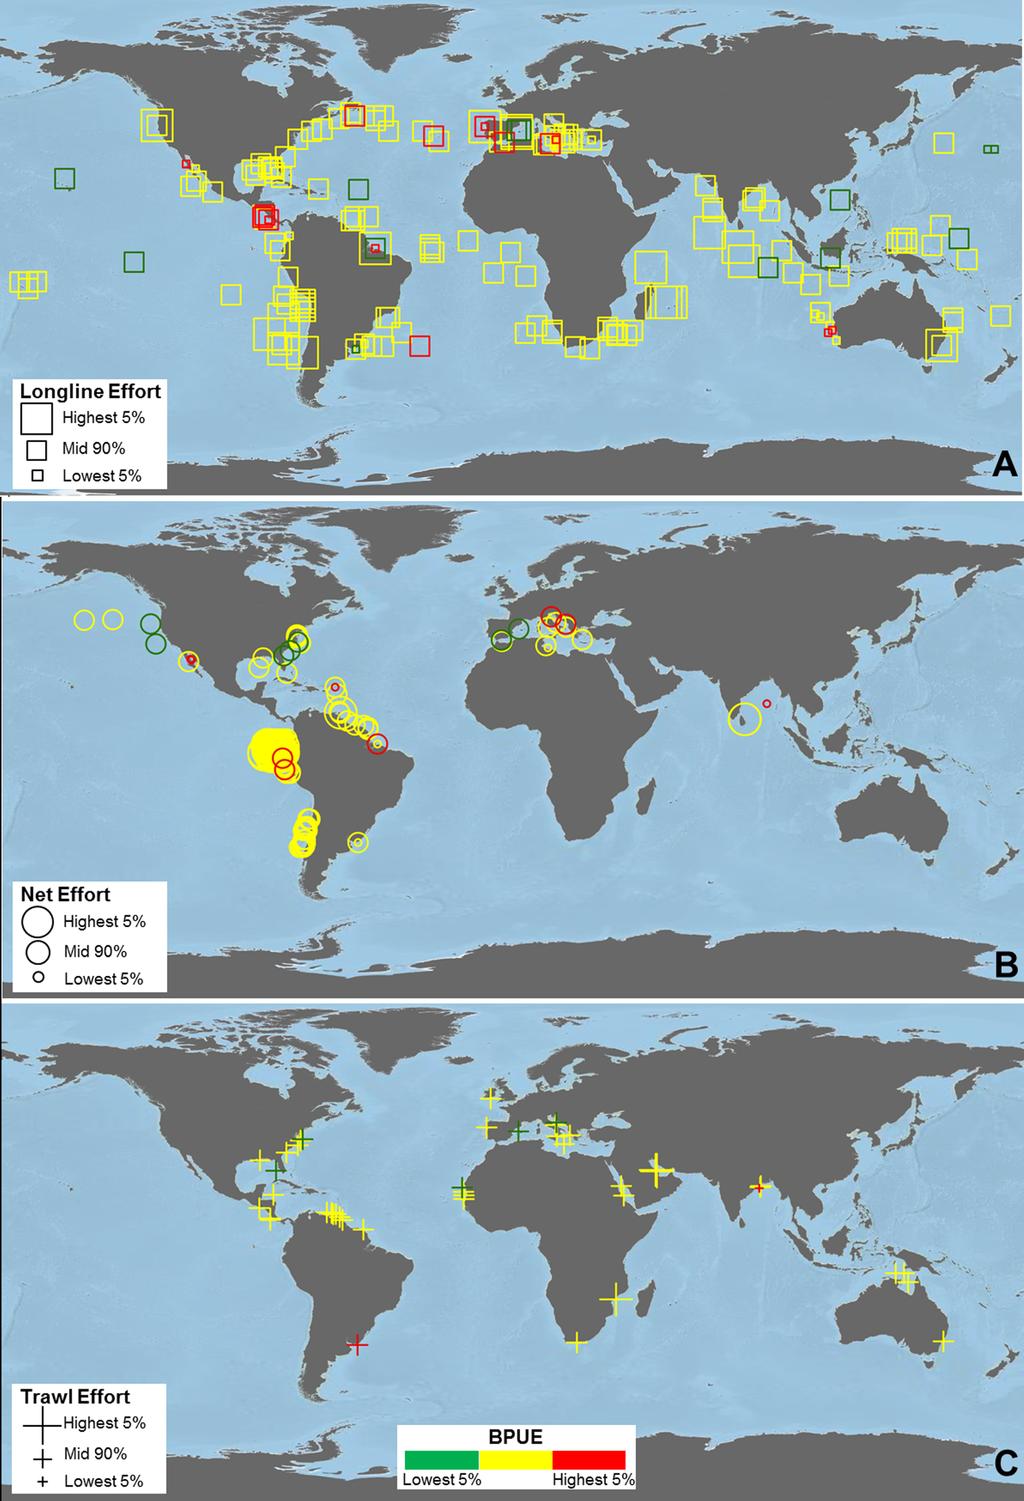 WALLACE ET AL. Fig. 1. Global distributions of sea turtle bycatch records for longlines (squares, A), nets (circles, B), and trawls (crosses, C) from 1990 to 2011.